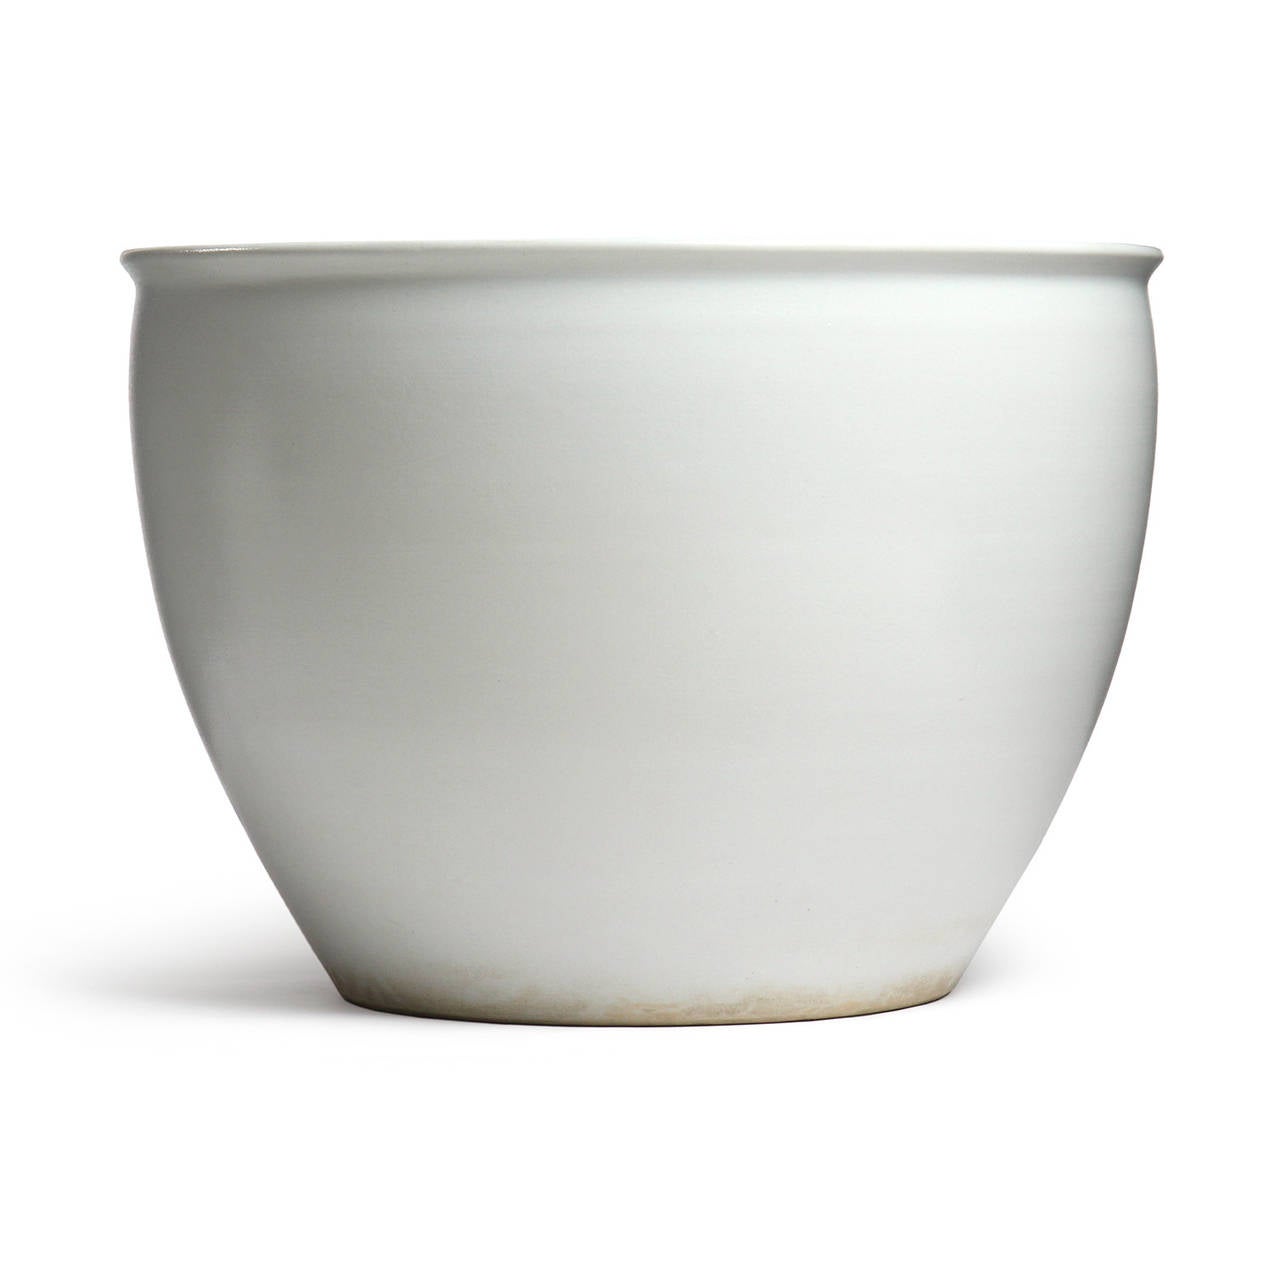 A pair of finely crafted and generously scaled circular ceramic jardinières covered in a rich cream matte salt glaze.